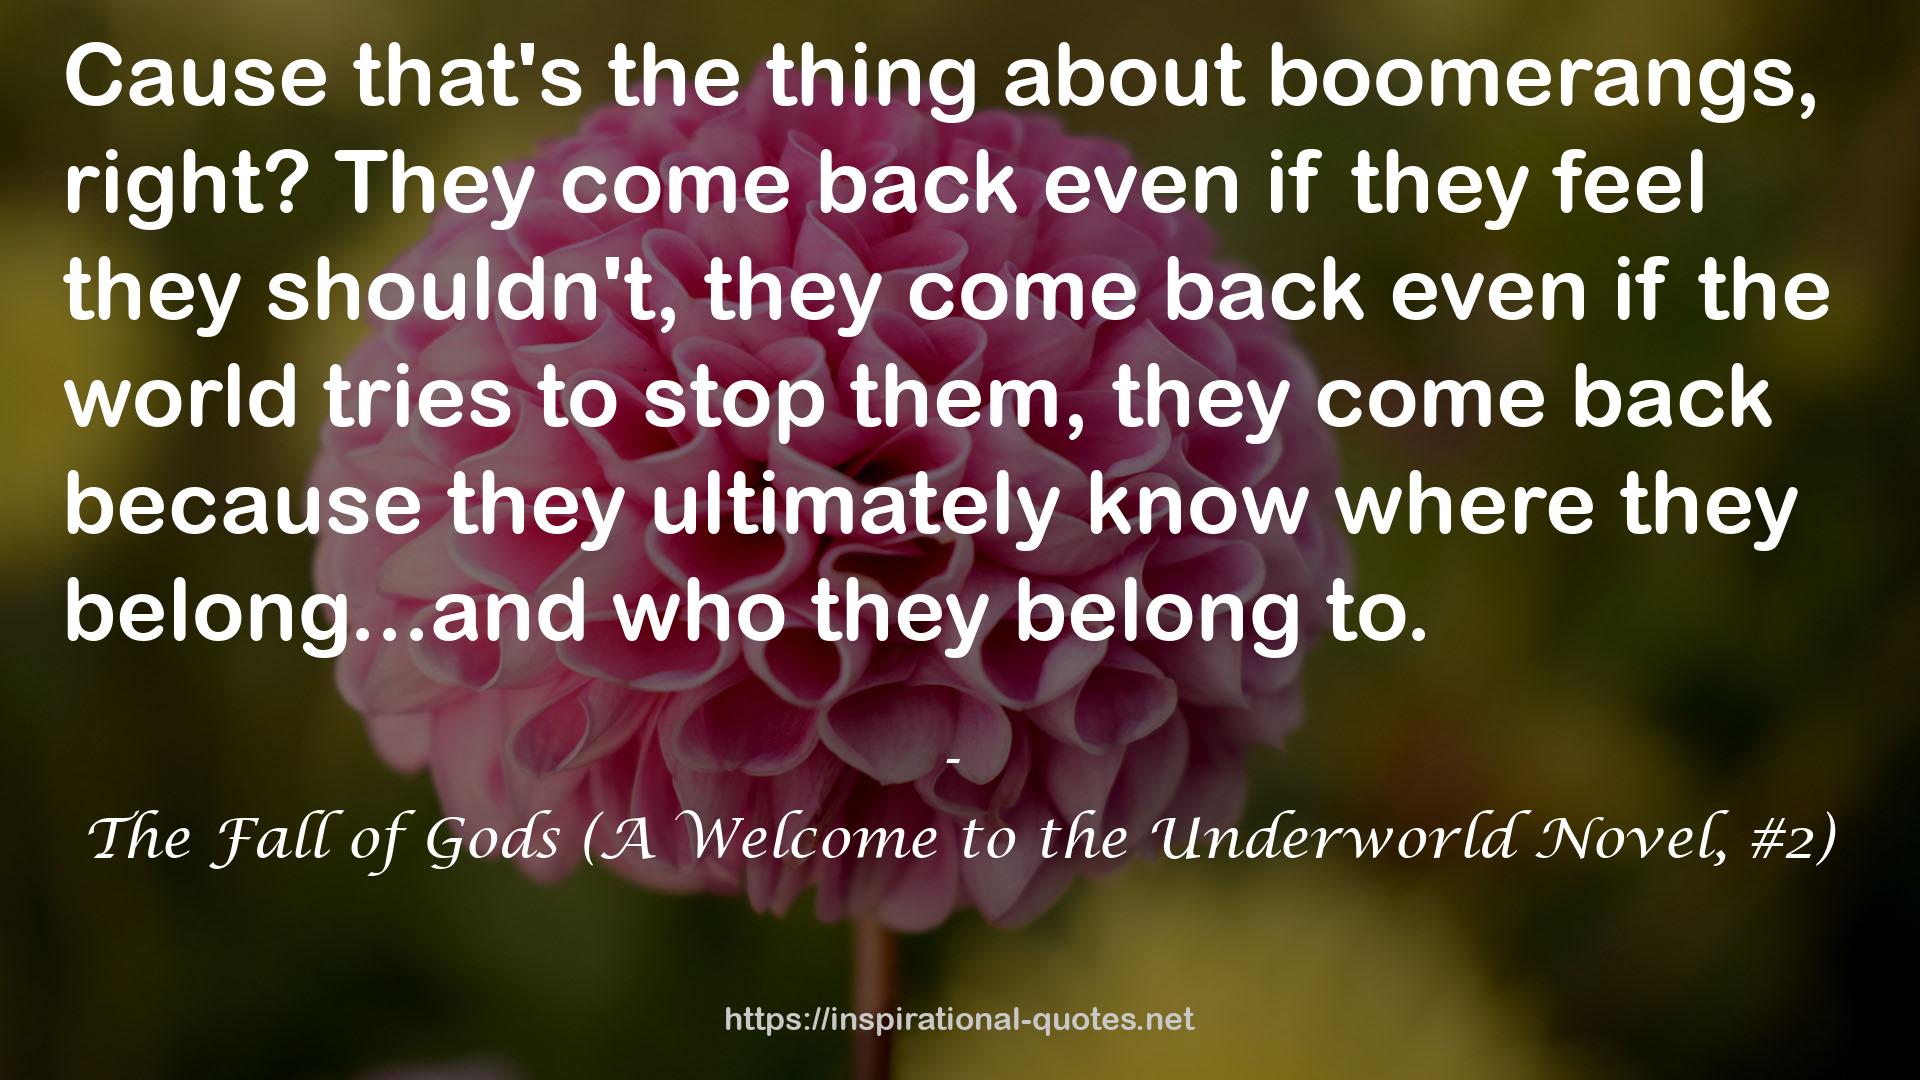 The Fall of Gods (A Welcome to the Underworld Novel, #2) QUOTES